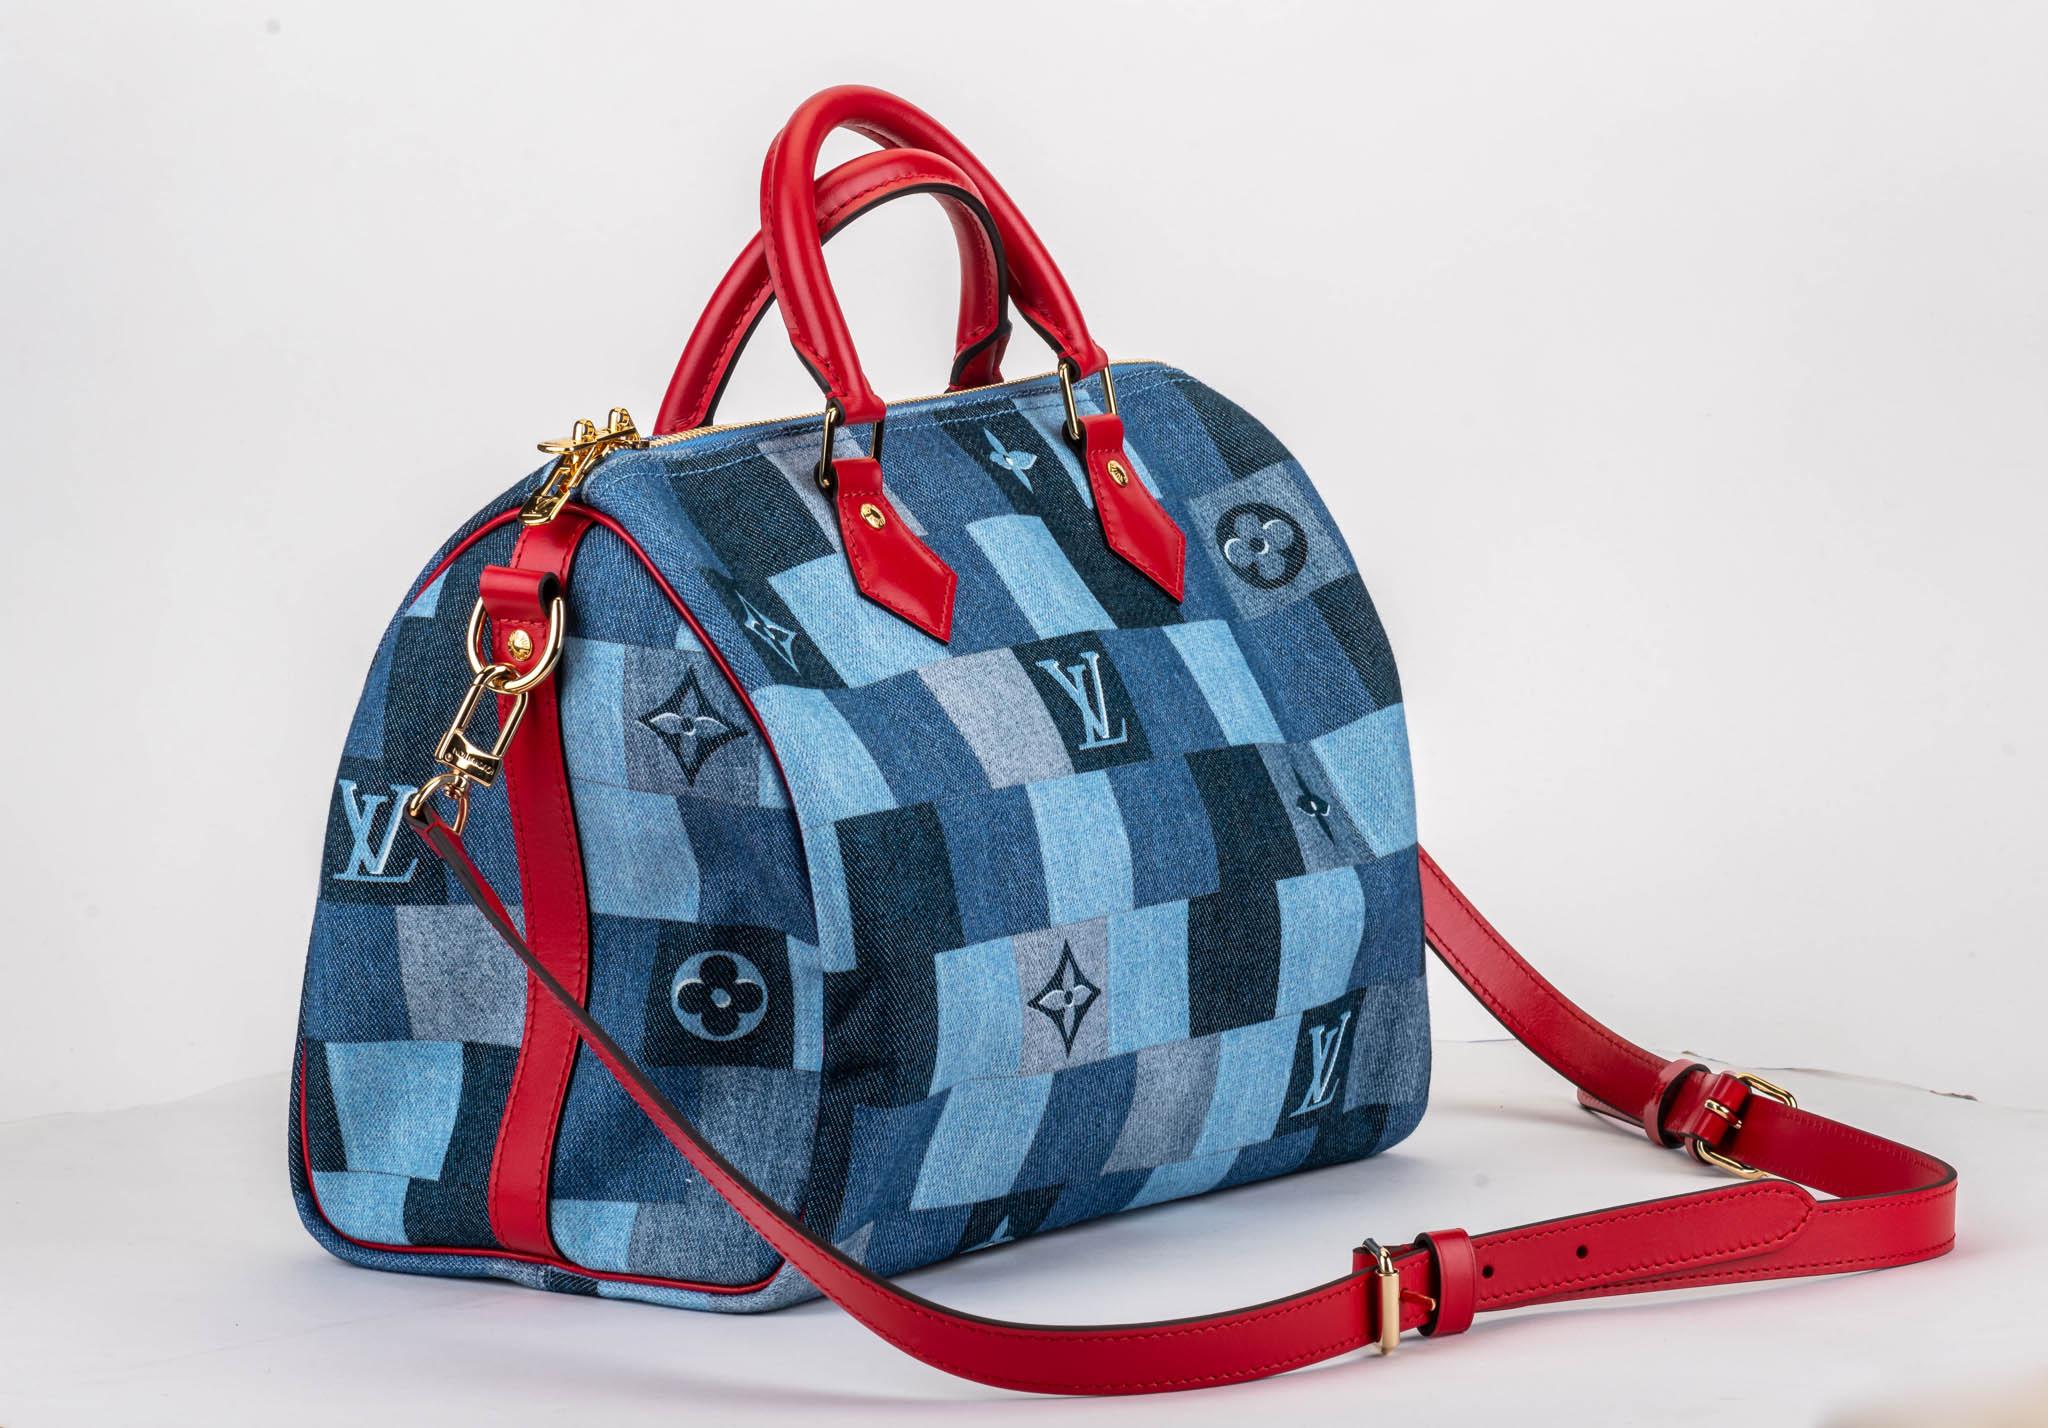 Louis Vuitton limited edition speedy 30 bandouliere in denim print. Red leather details and gold tone hardware. Comes with dust cover and original box.